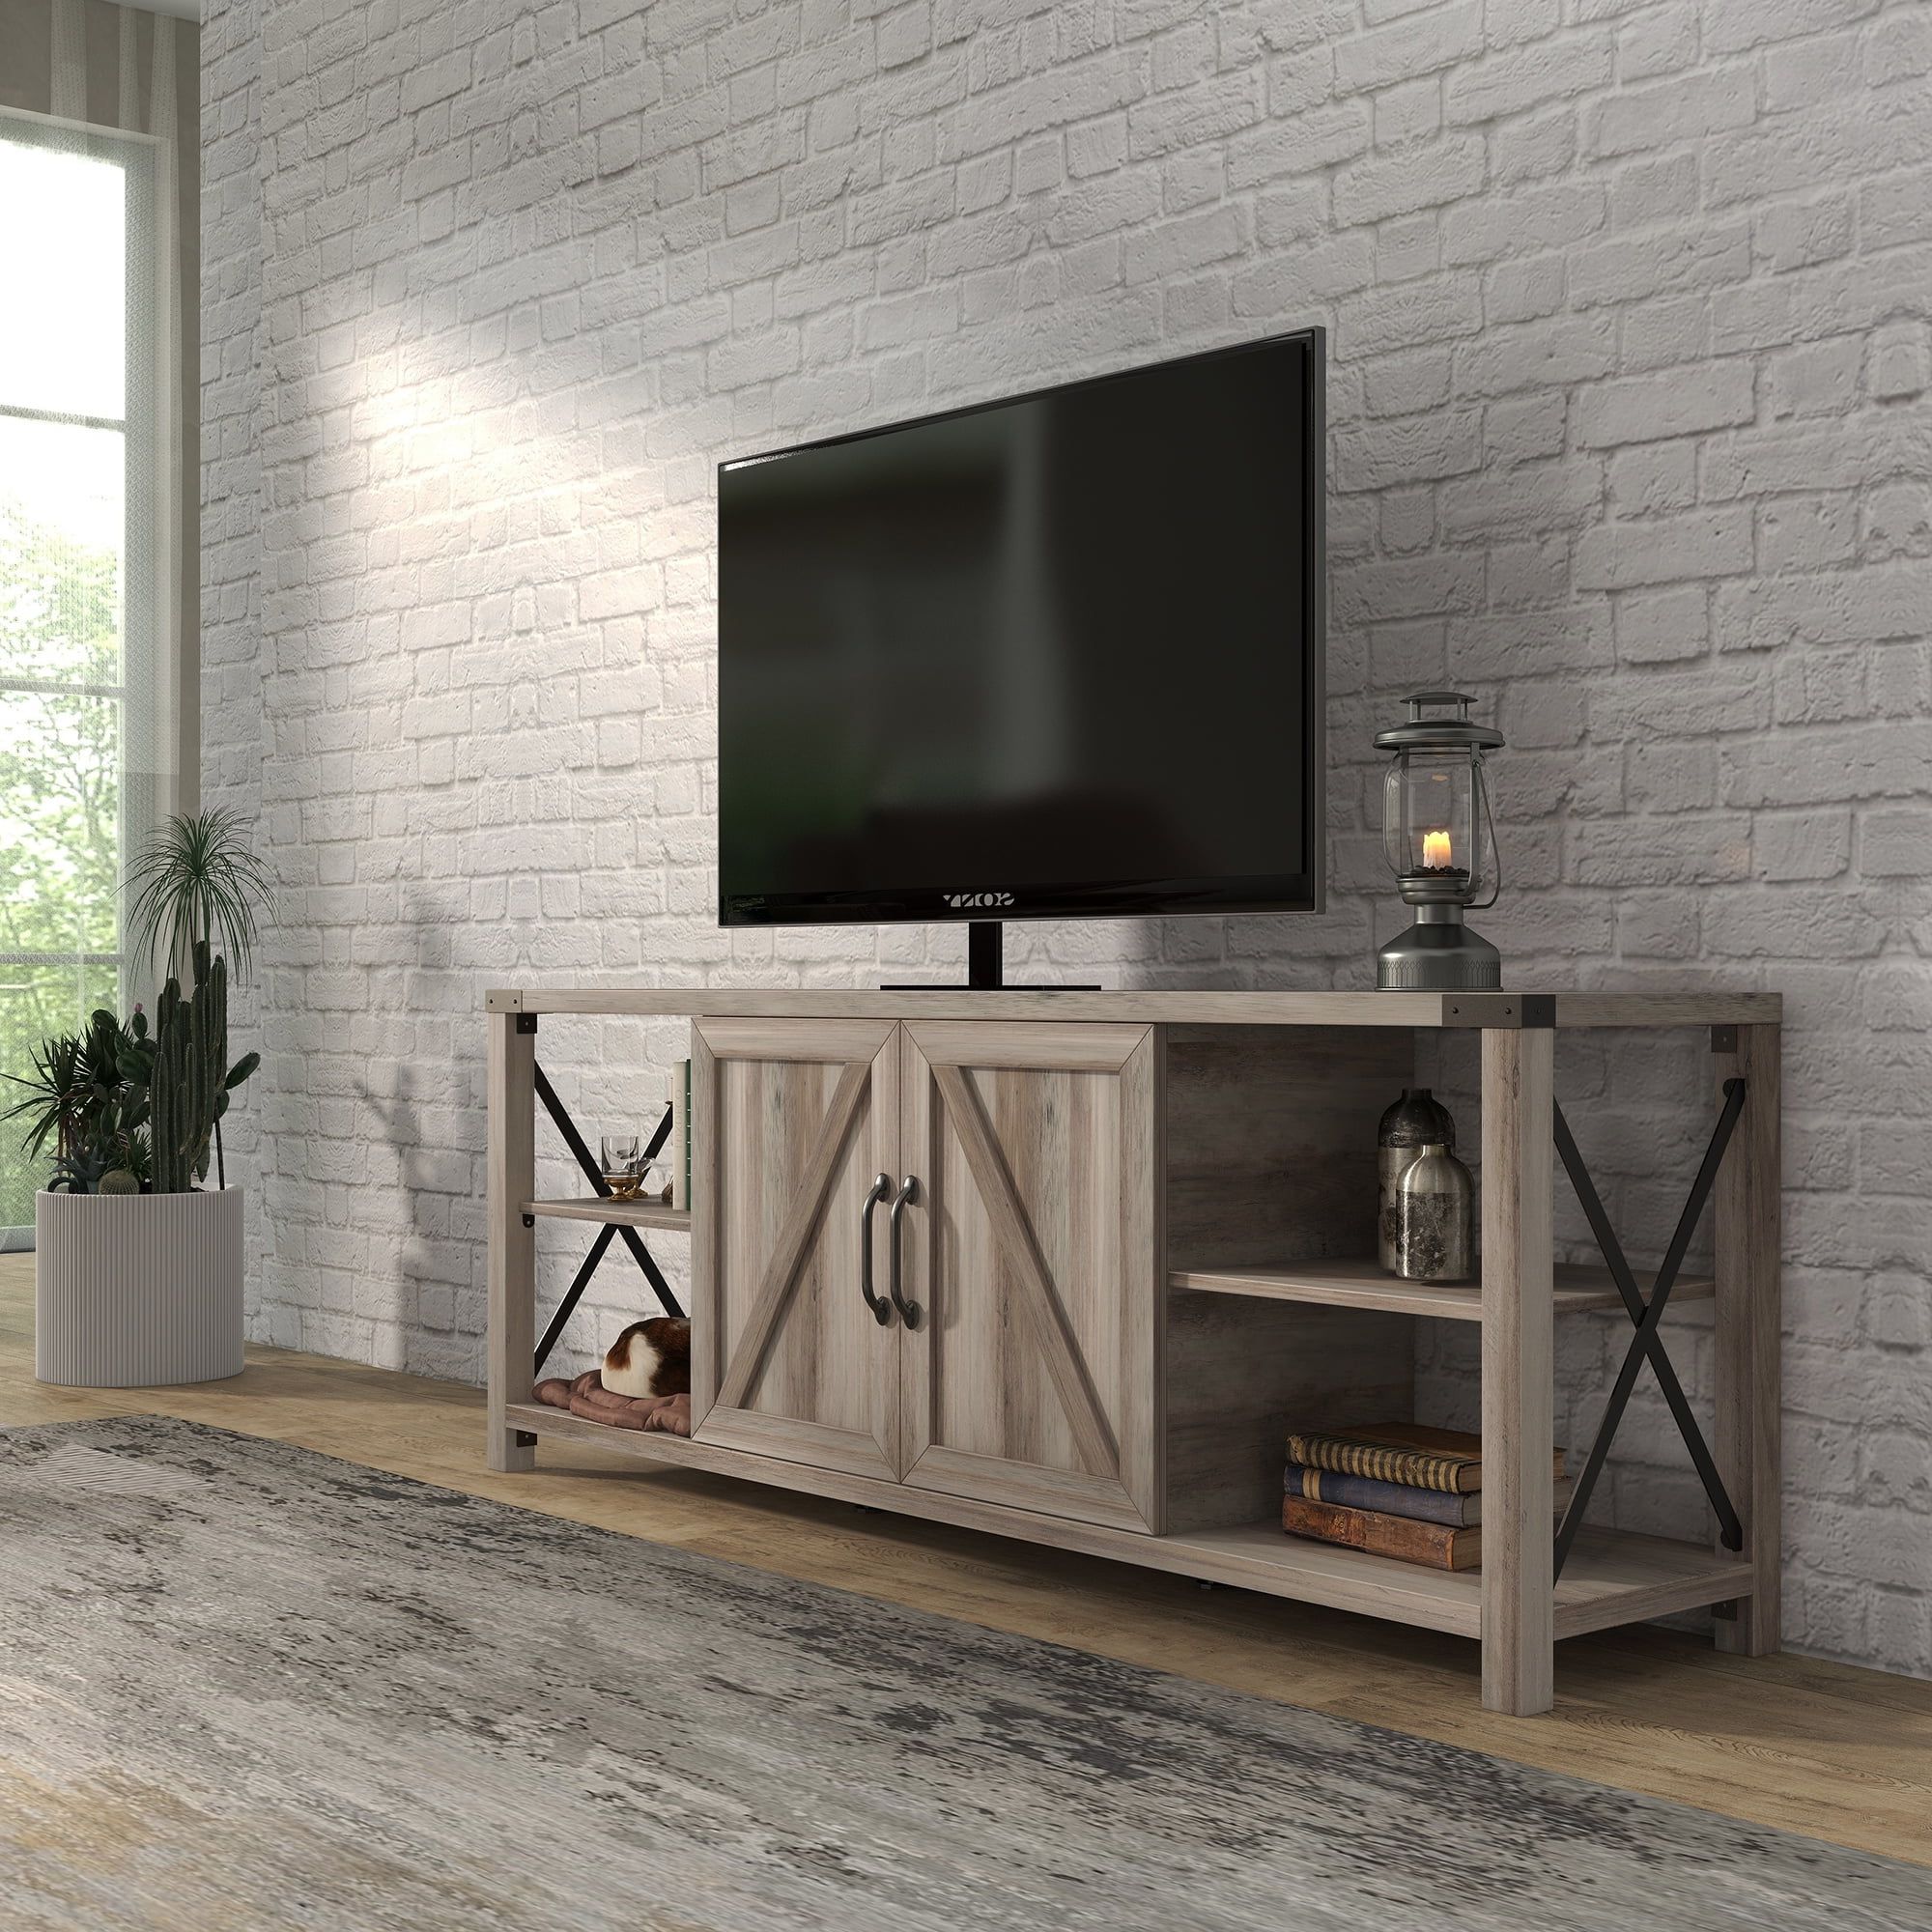 Newest Bestier Led Tv Stand For Tvs Up To 75 Entertainment Center For Living Throughout Bestier Tv Stand For Tvs Up To 75" (View 6 of 15)